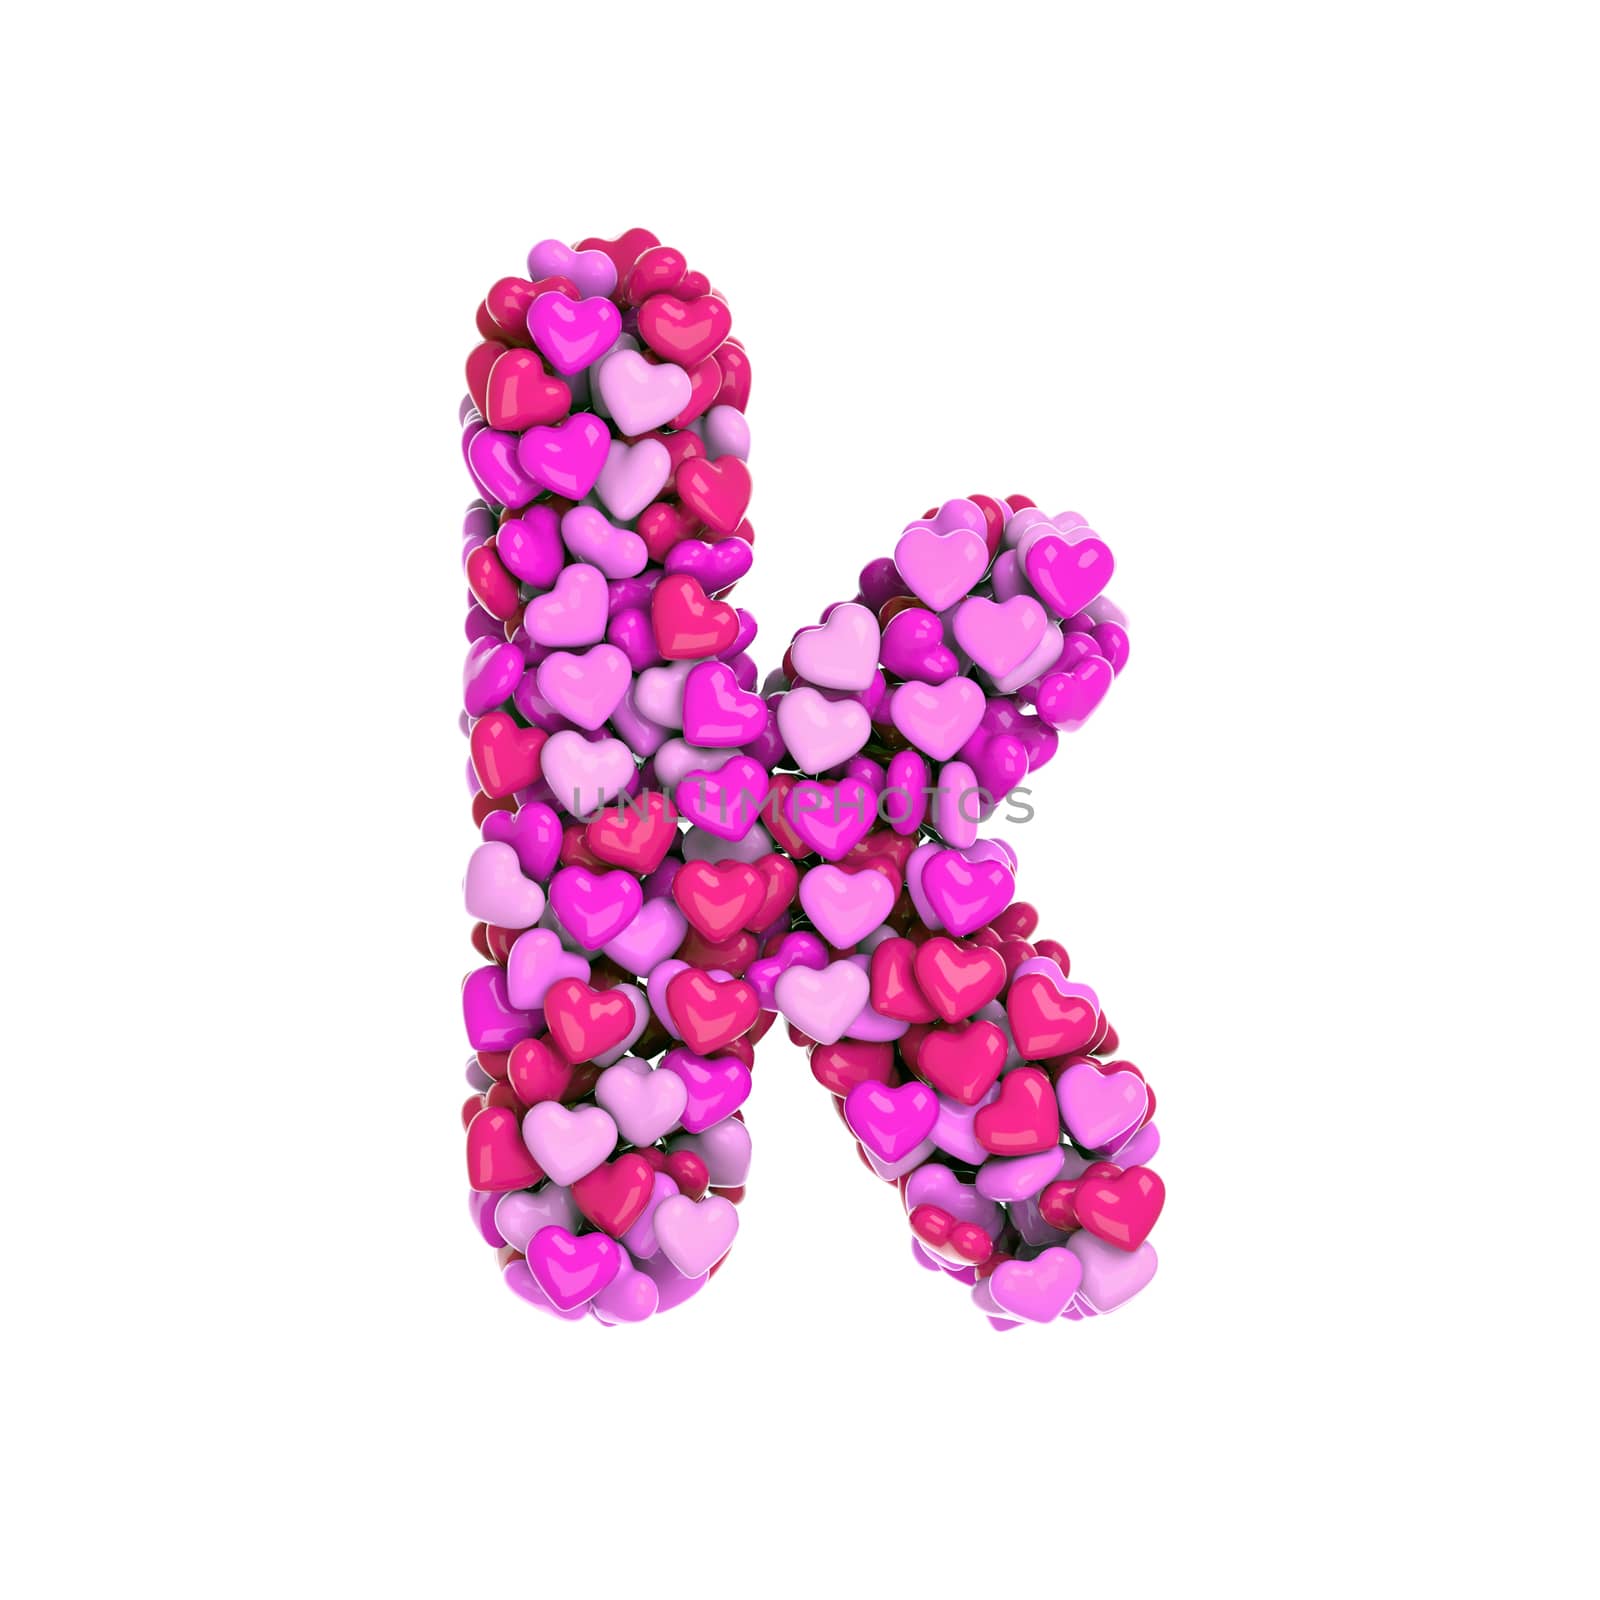 Valentine letter K - Small 3d pink hearts font isolated on white background. This alphabet is perfect for creative illustrations related but not limited to Love, passion, wedding...